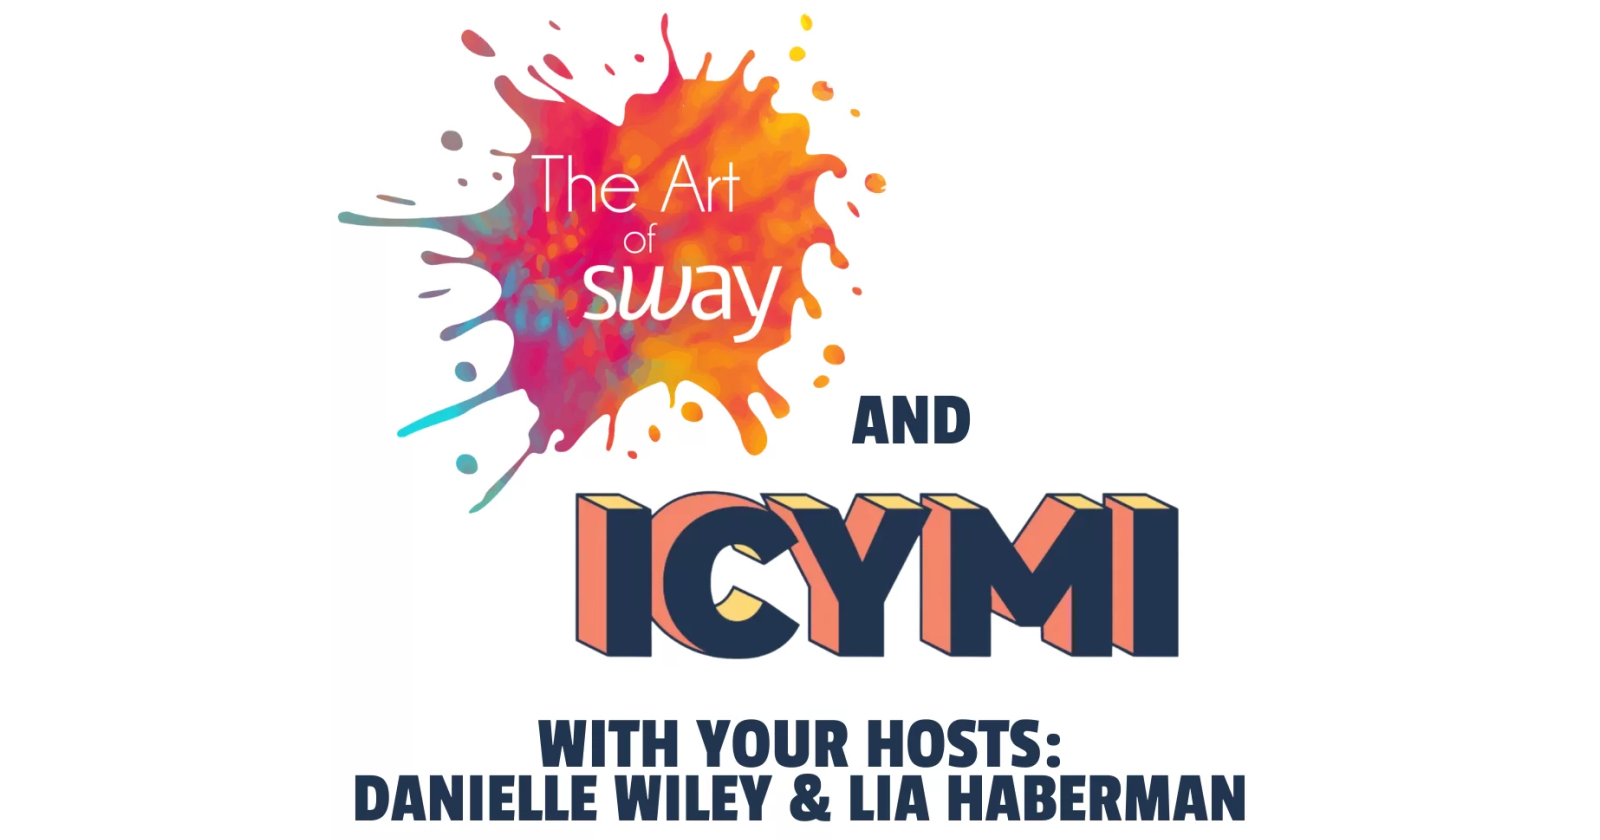 The Art of Sway and ICYMI Podcast with your hosts: Danielle Wiley and Lia Haberman